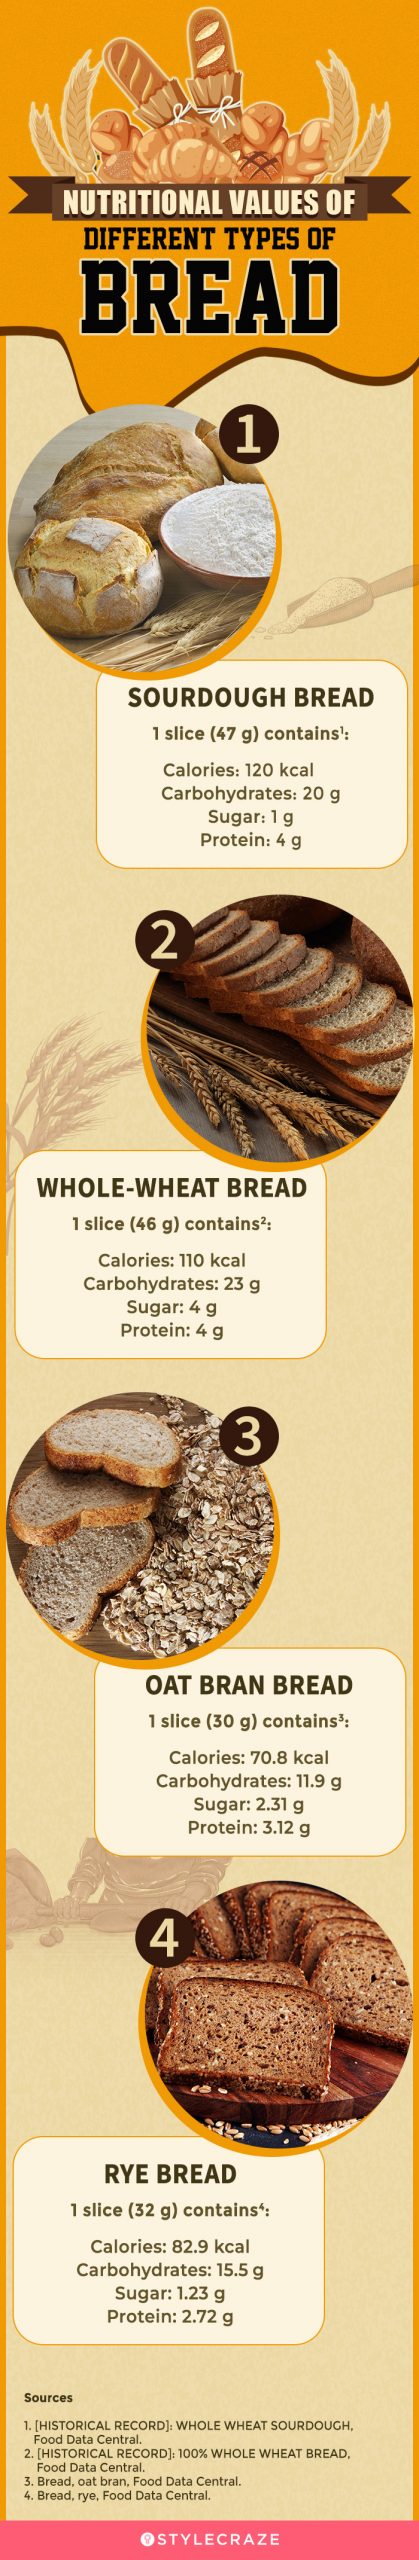 nutritional values of different types of bread[infographic]